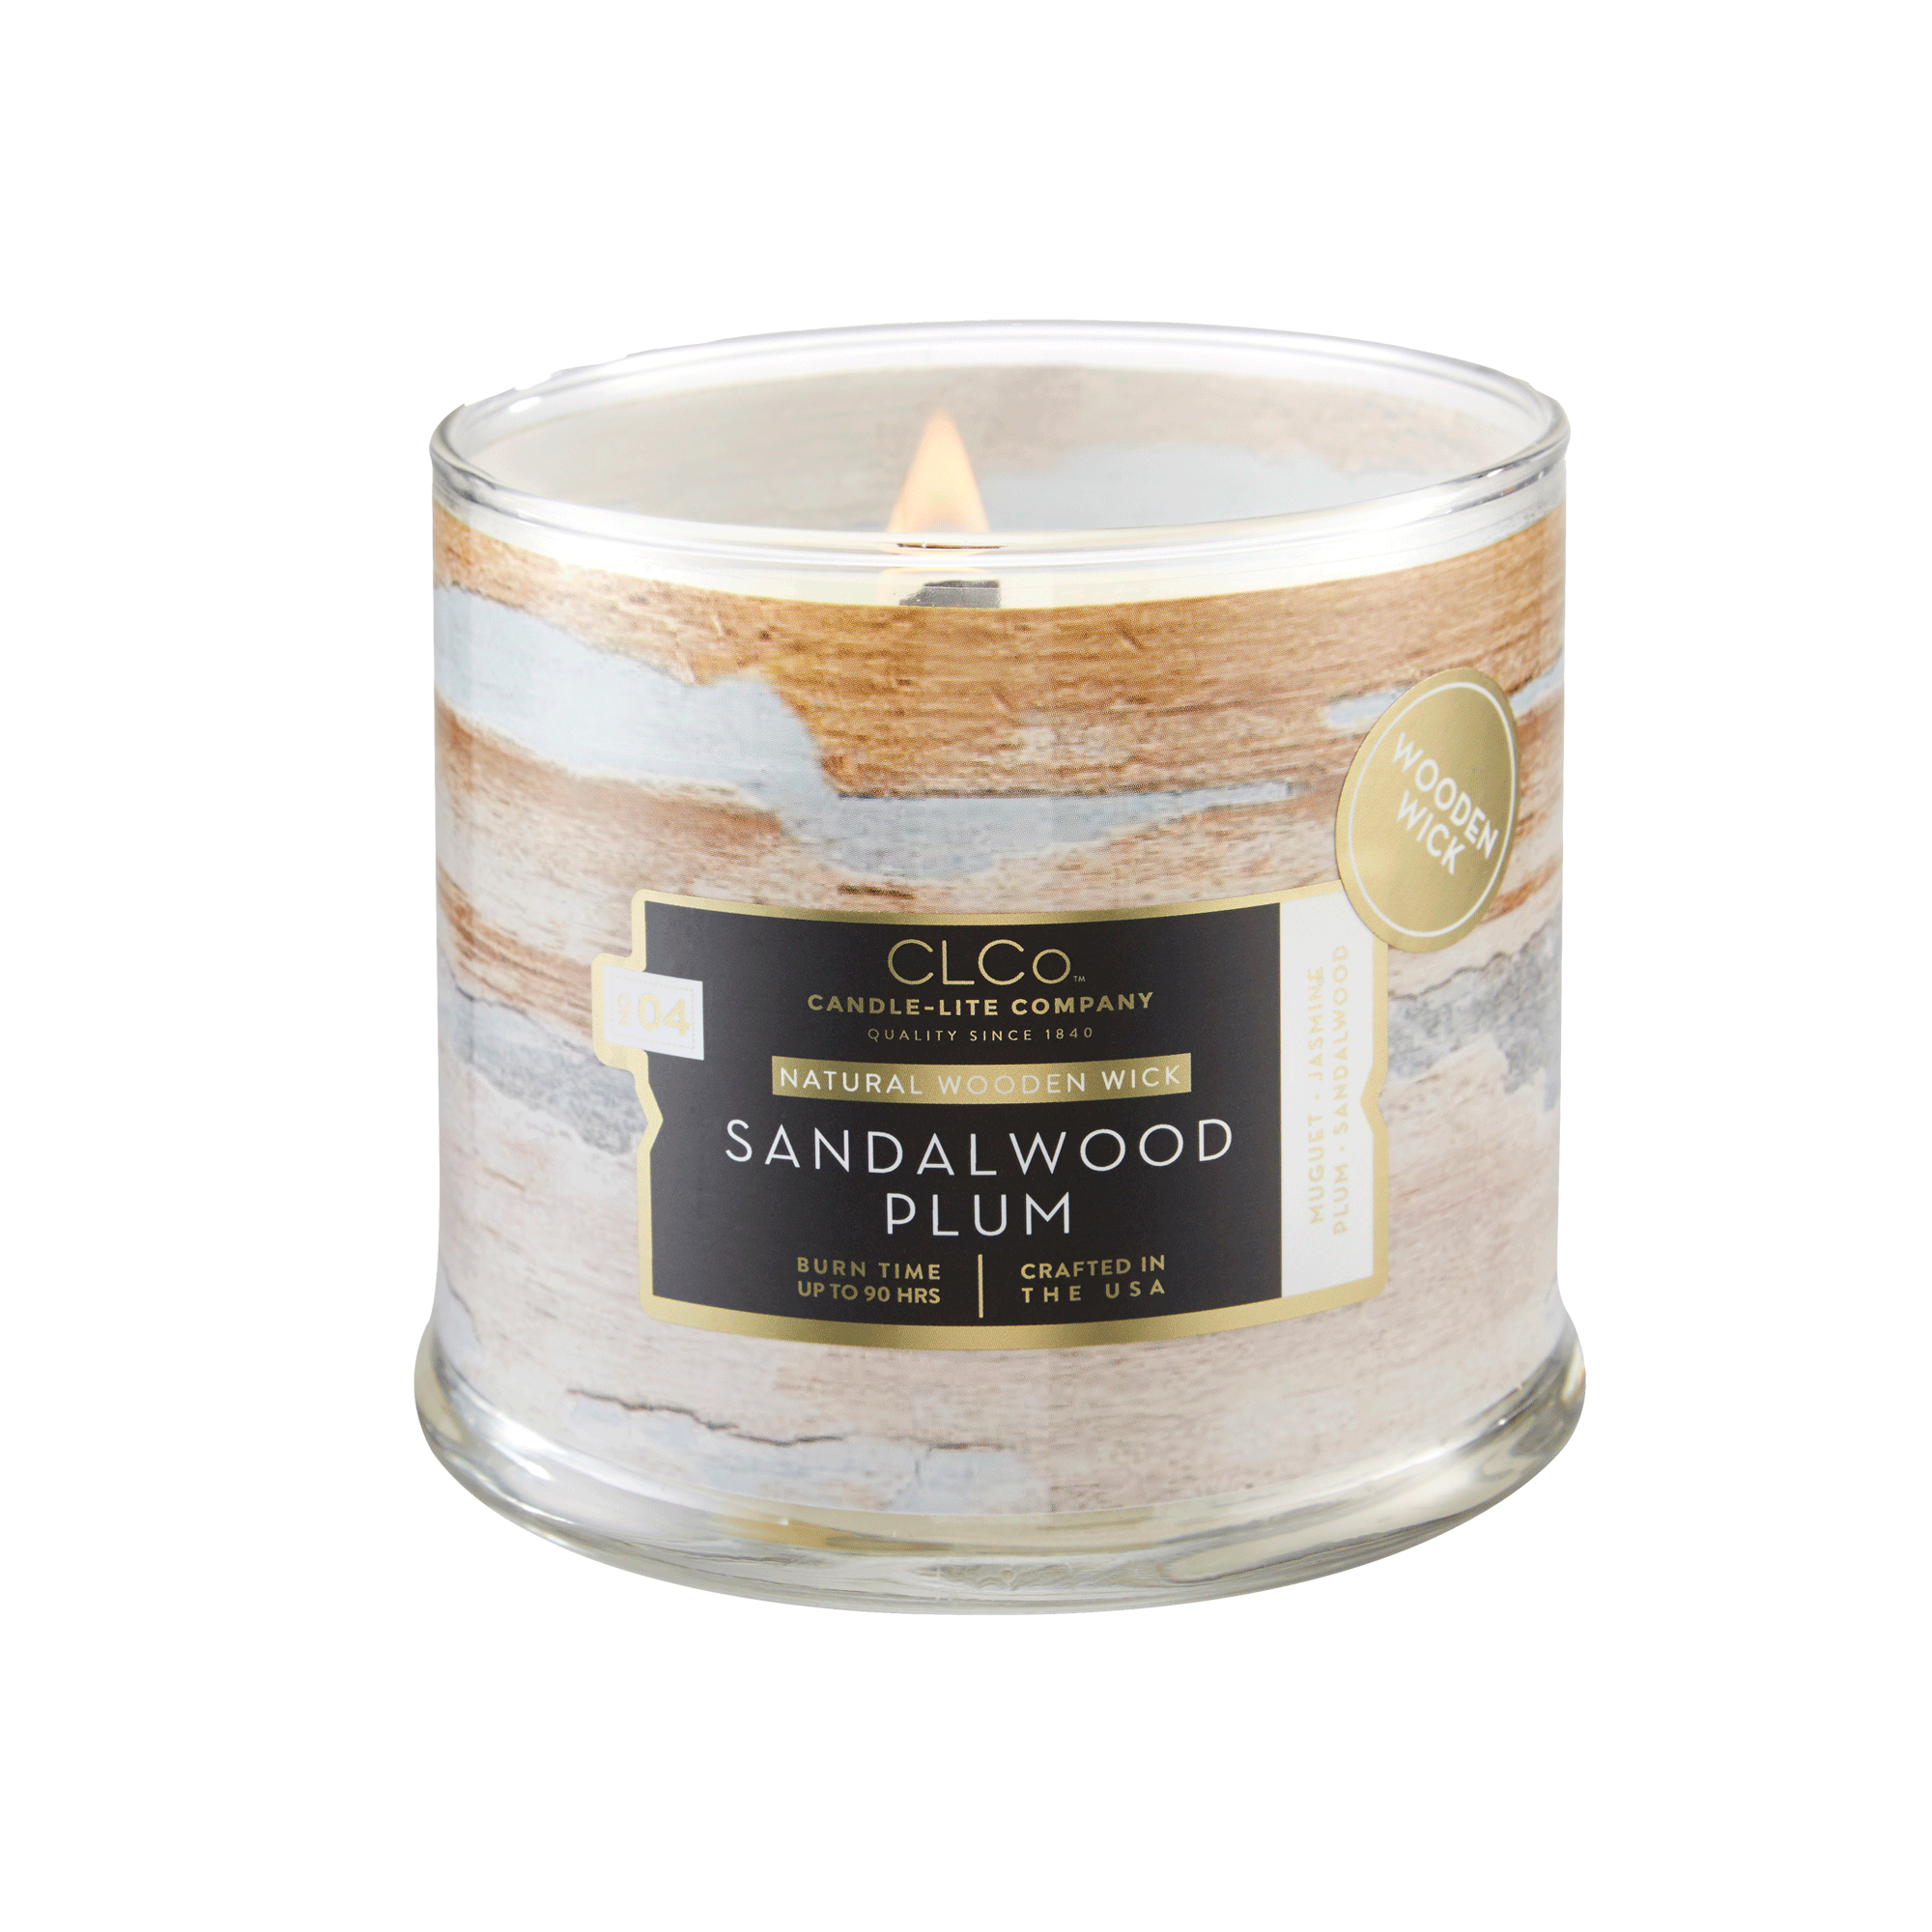 Flowers by The Sea Wood Wick Candle - 13 oz